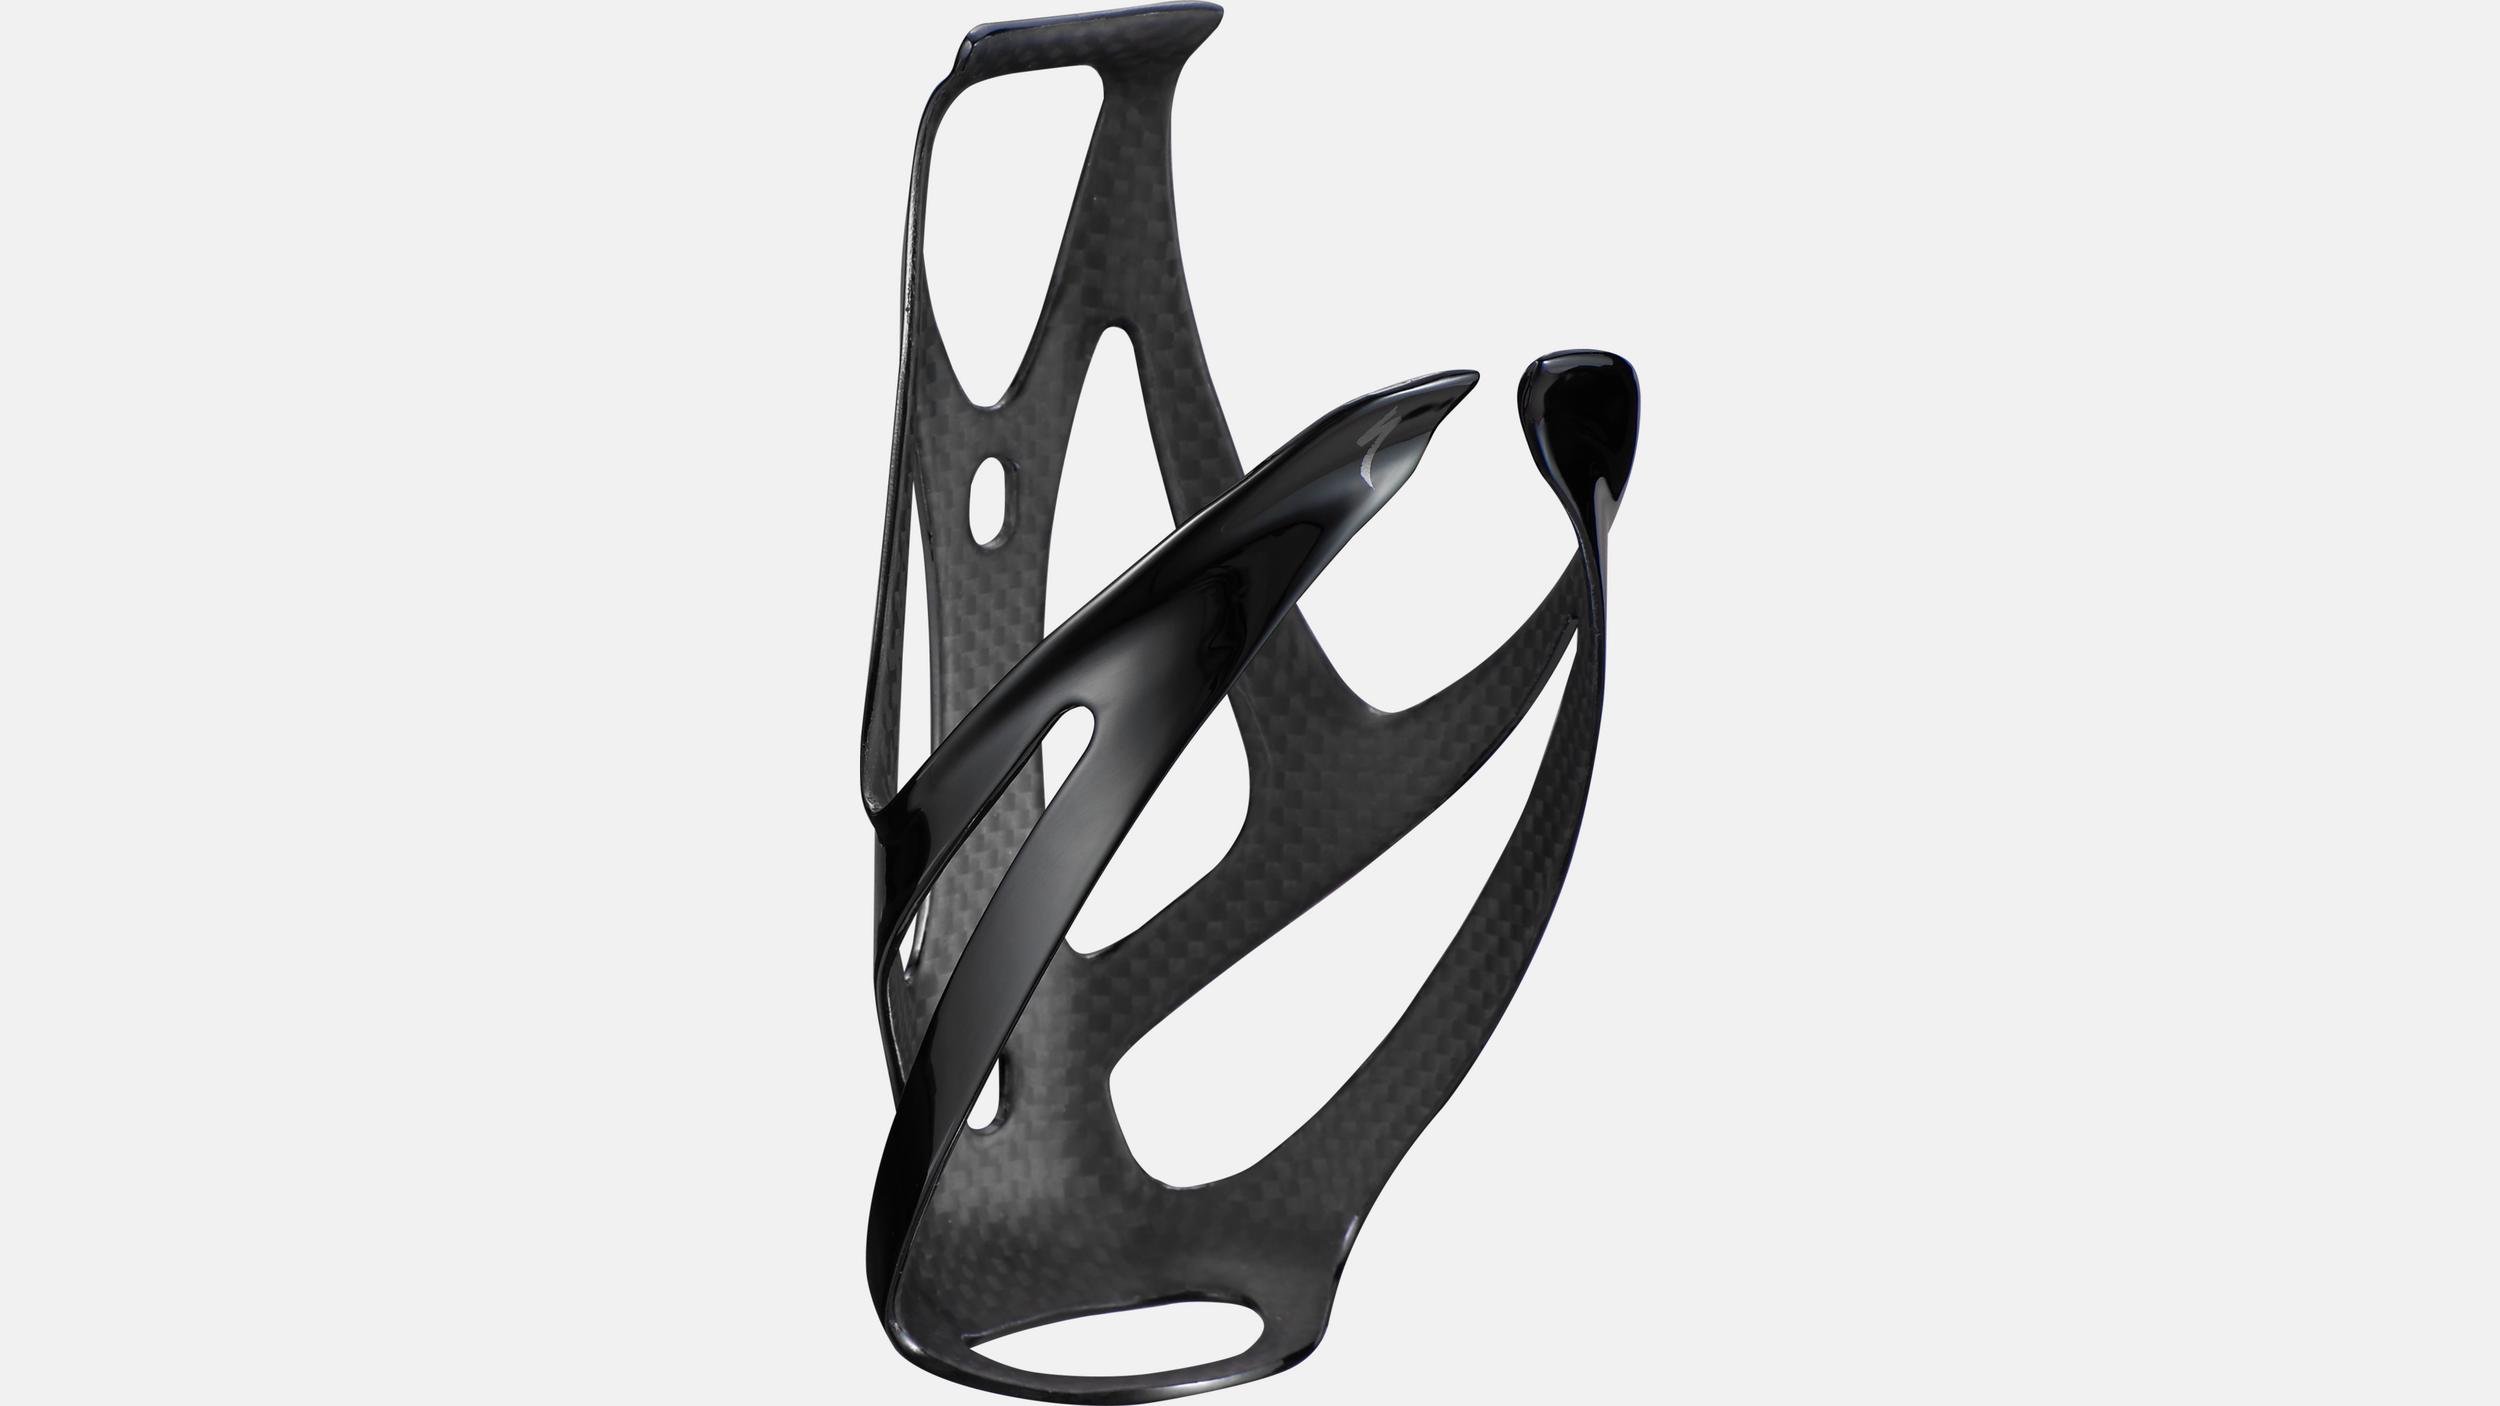 S-Works Carbon Rib Cage III | Specialized.com